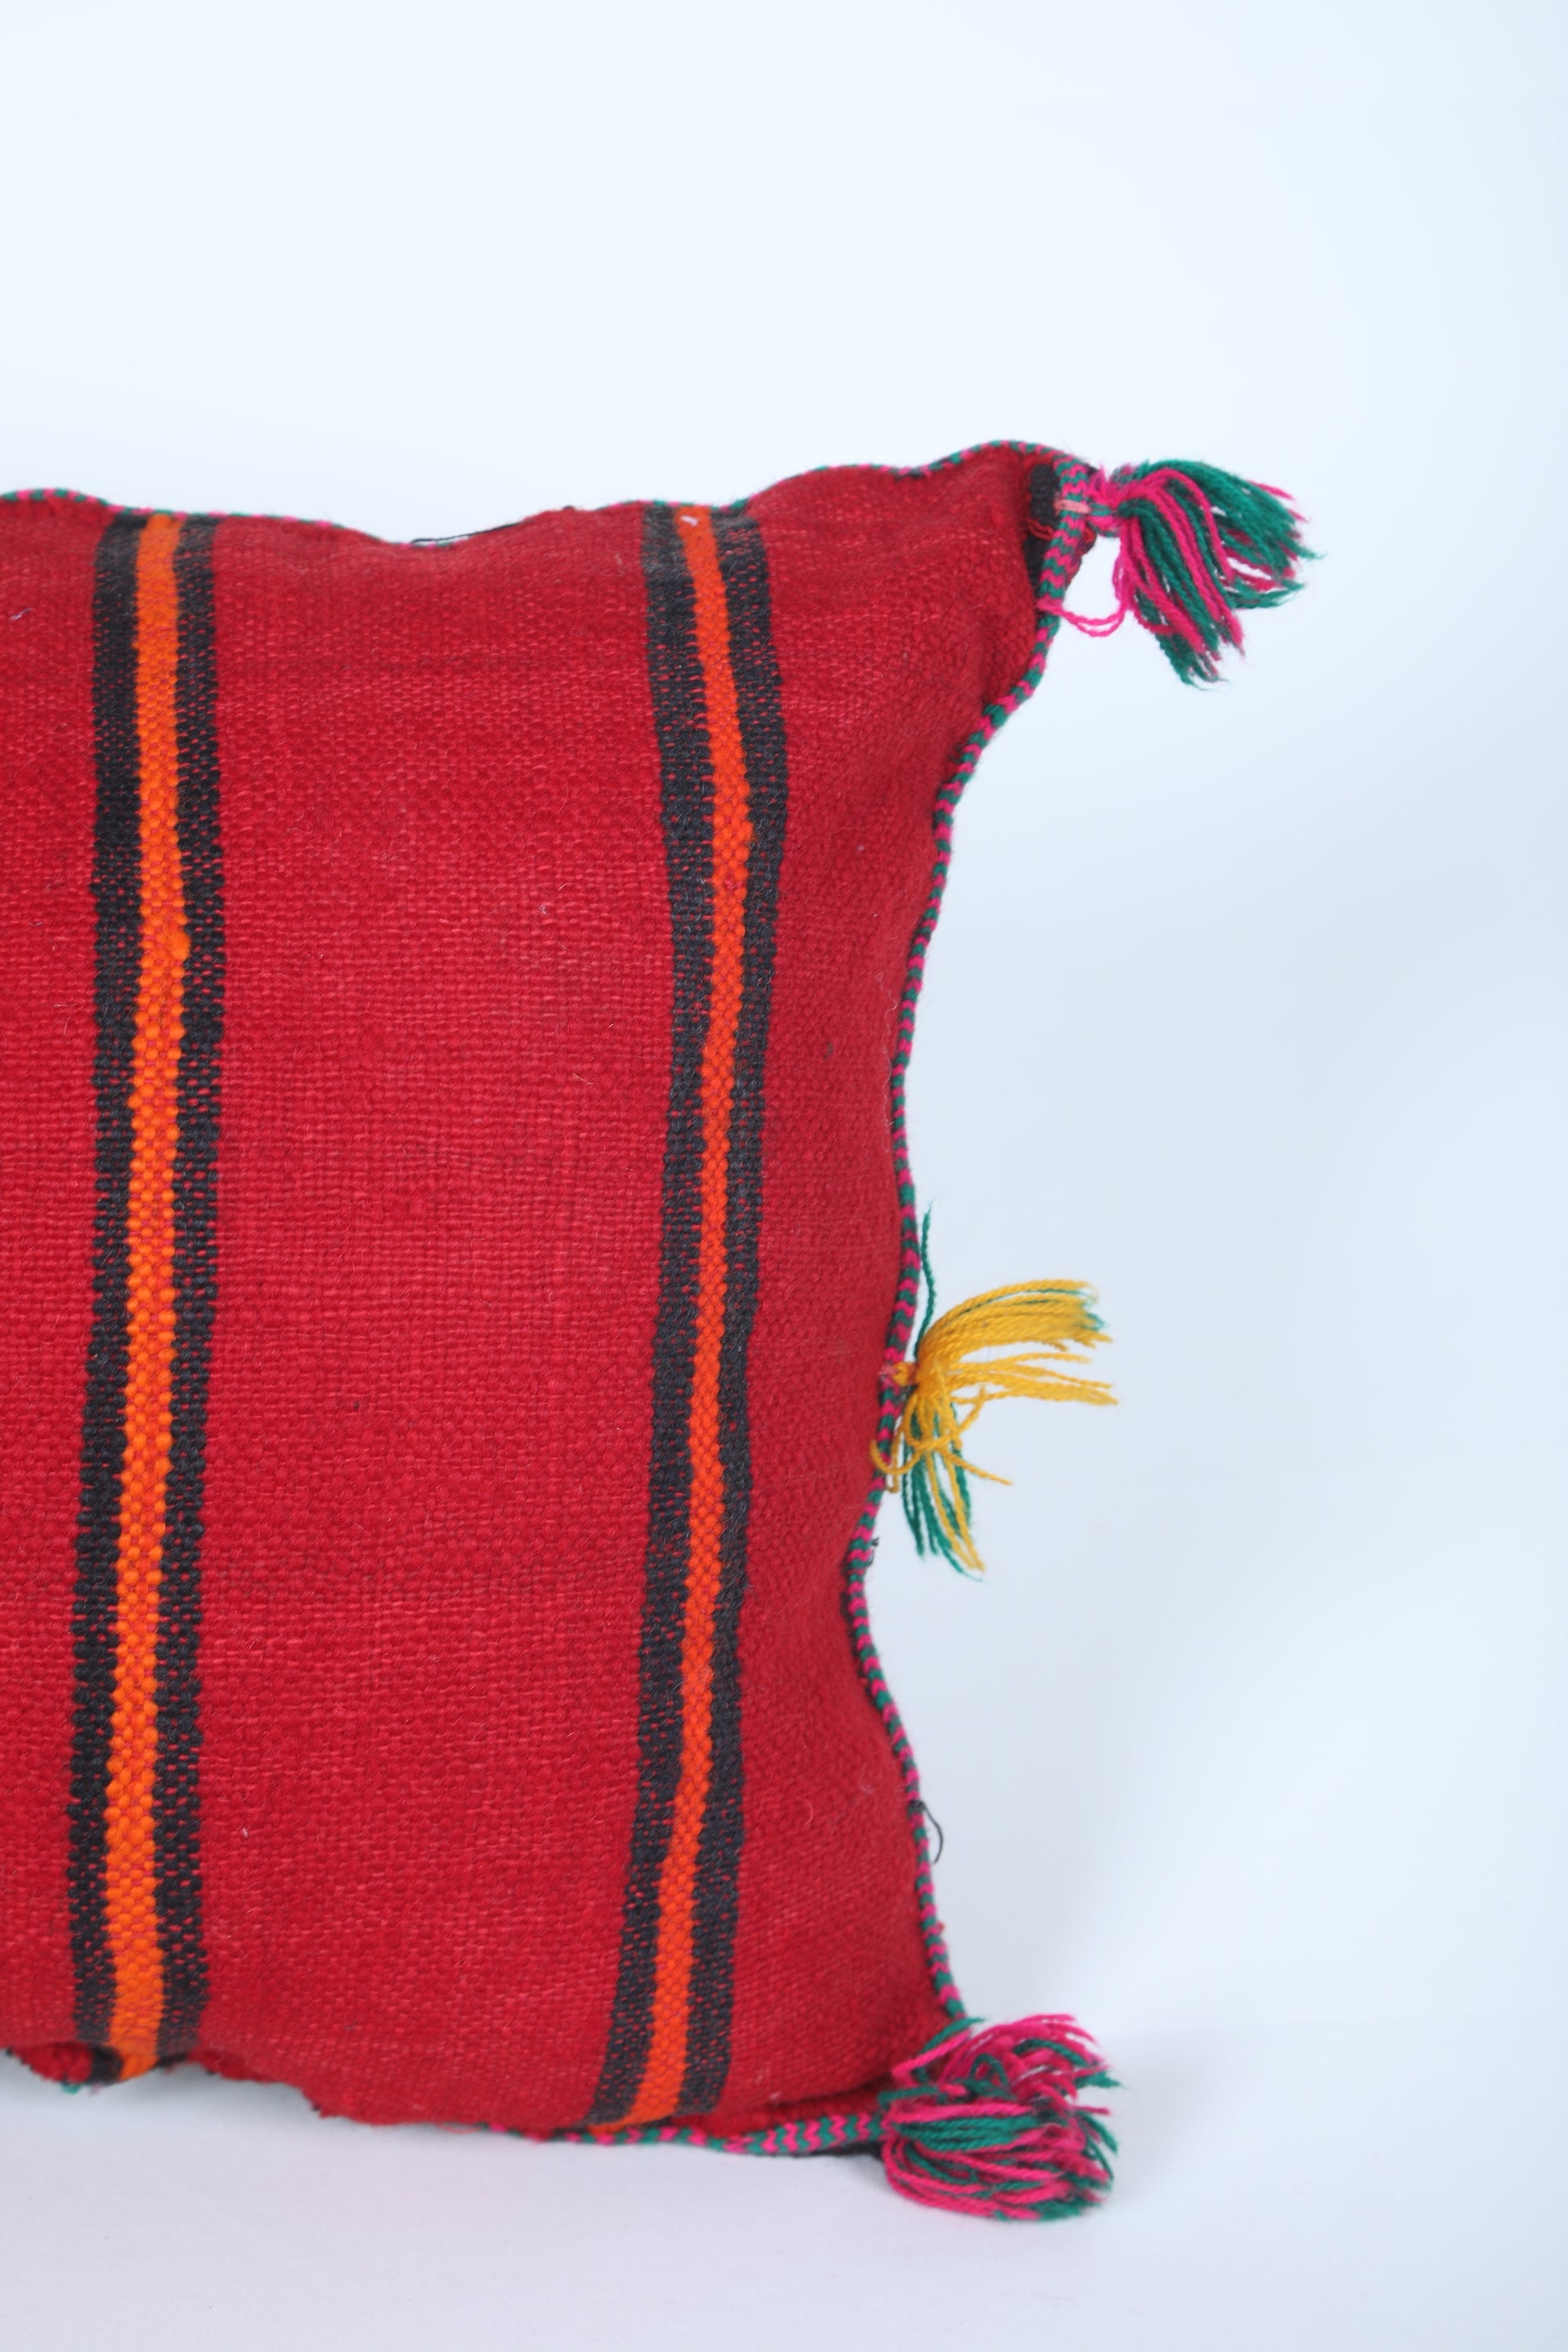 Vintage Moroccan Kilim Pillow  14.5 INCHES X 18.5 INCHES